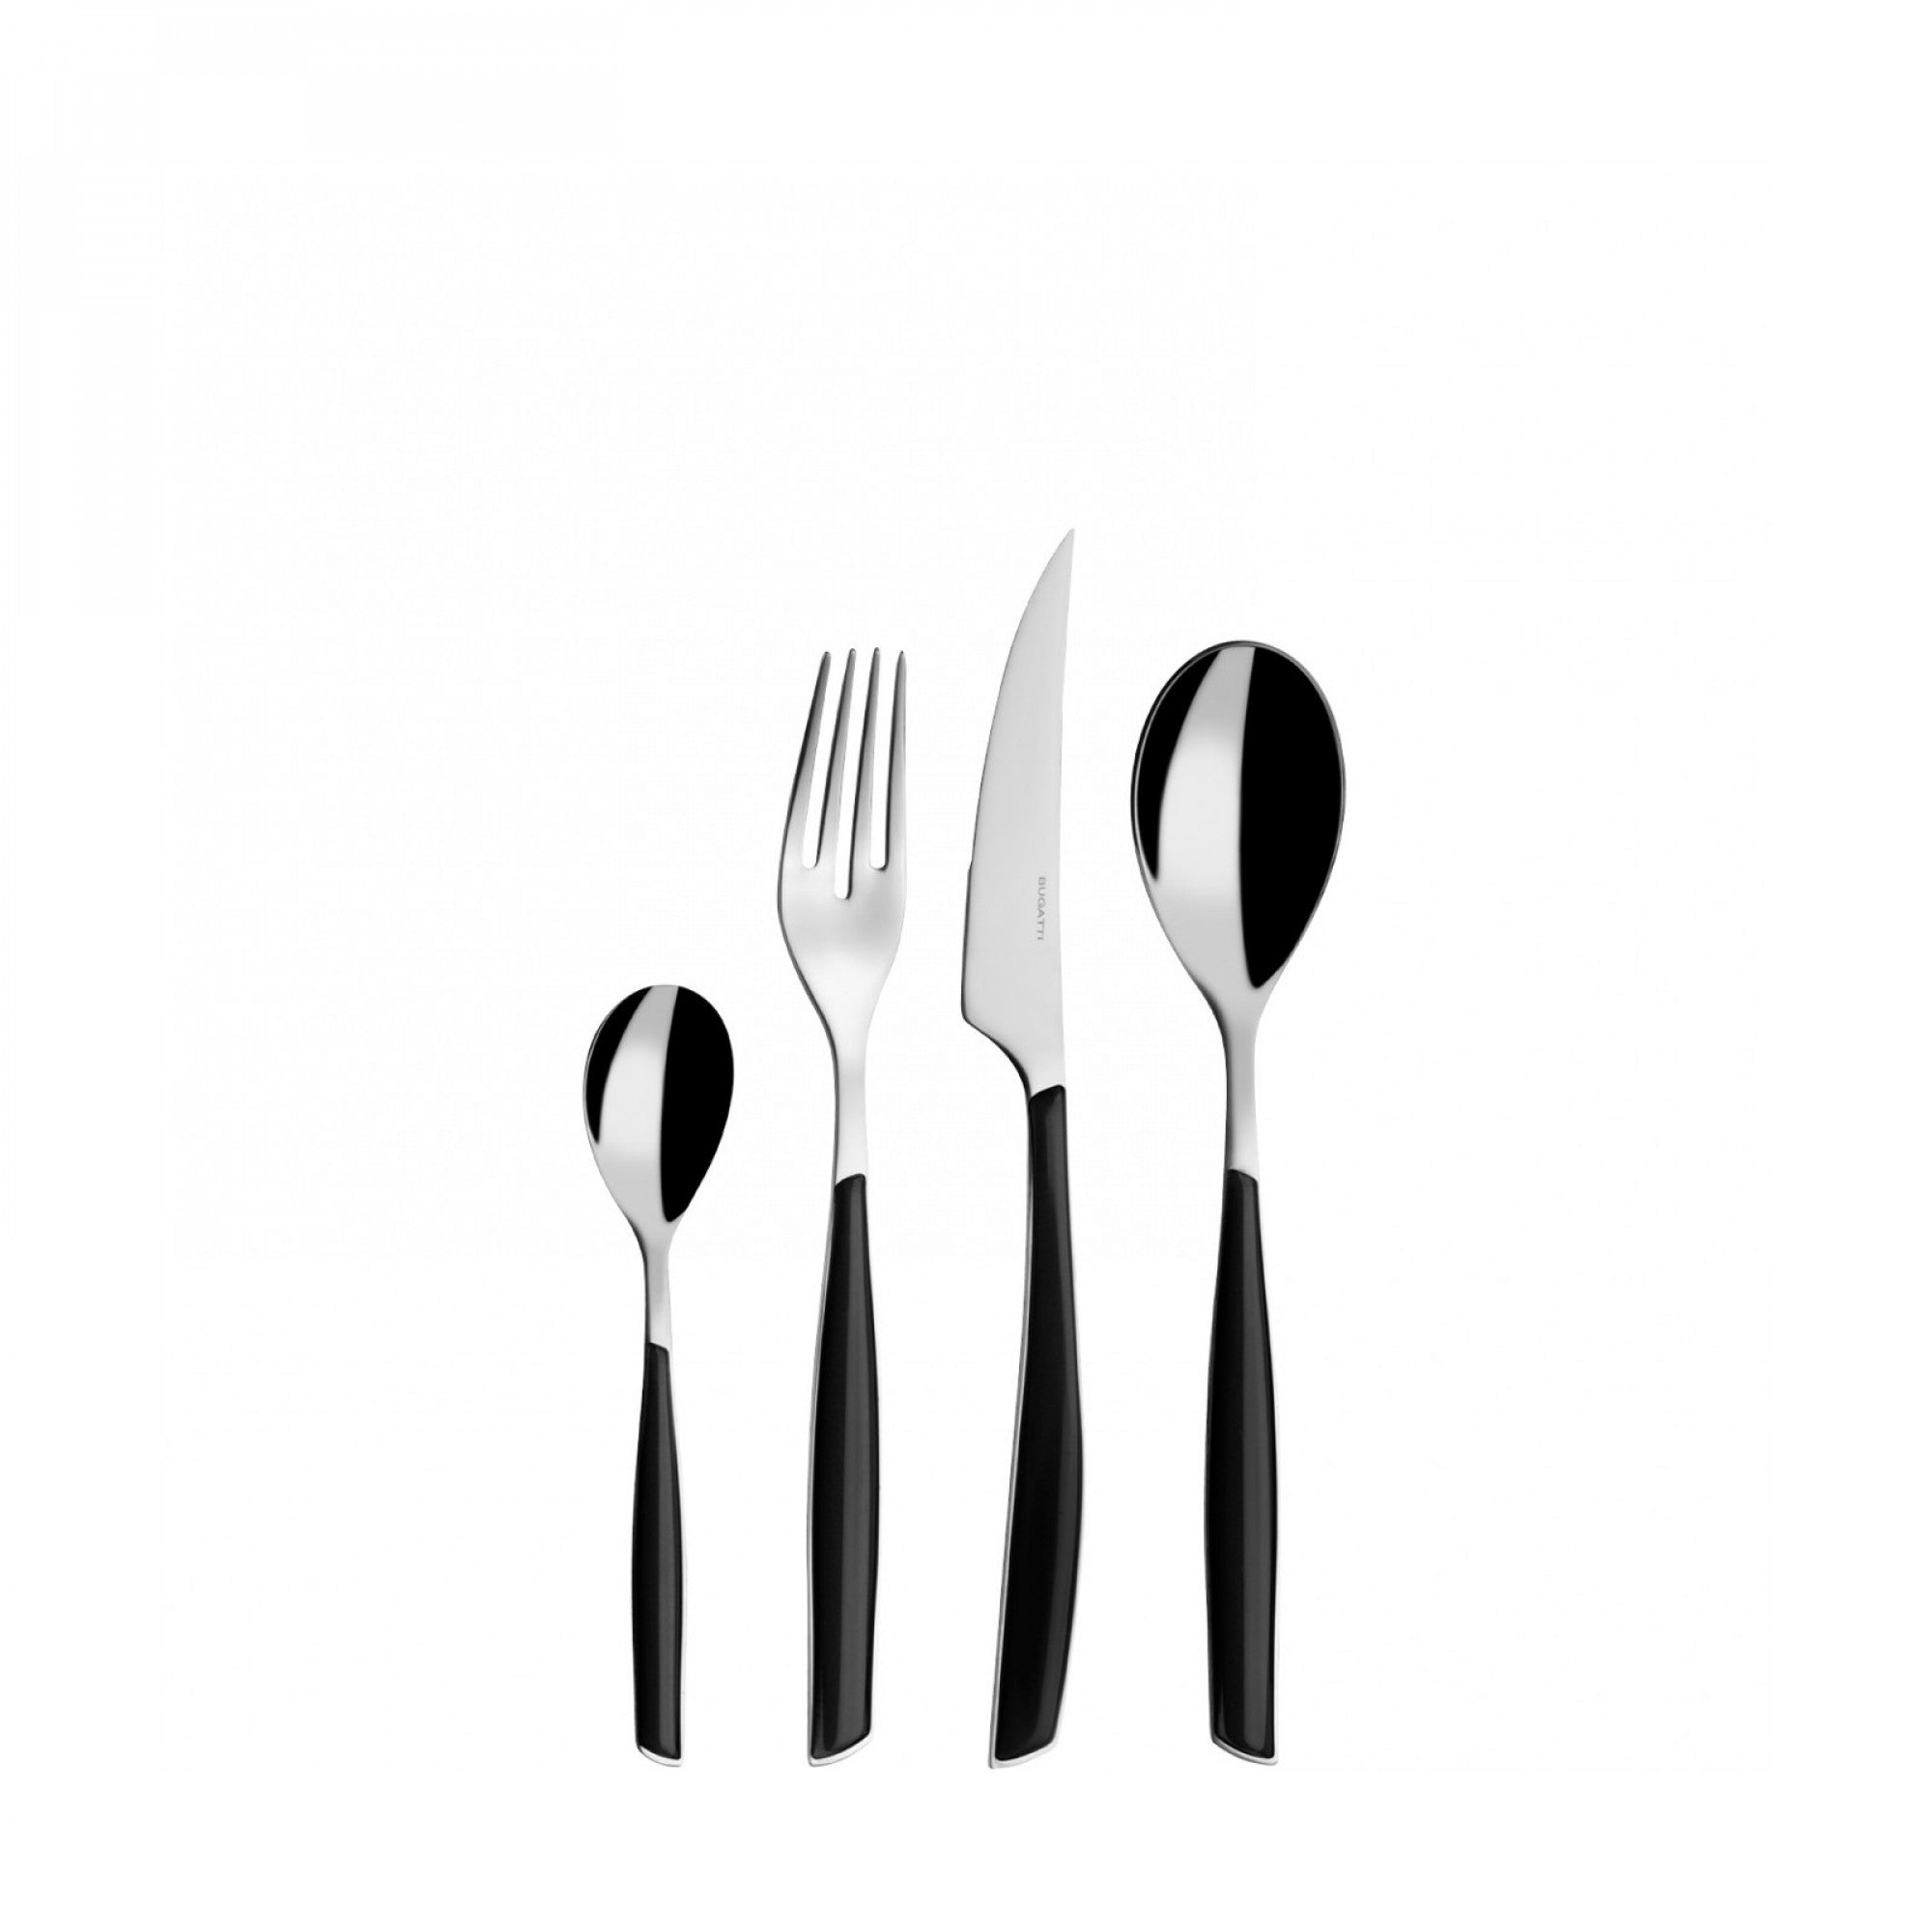 BUGATTI, Glamour, 24-piece cutlery set in 18/10 stainless steel. Packaged in Glamor box with windows